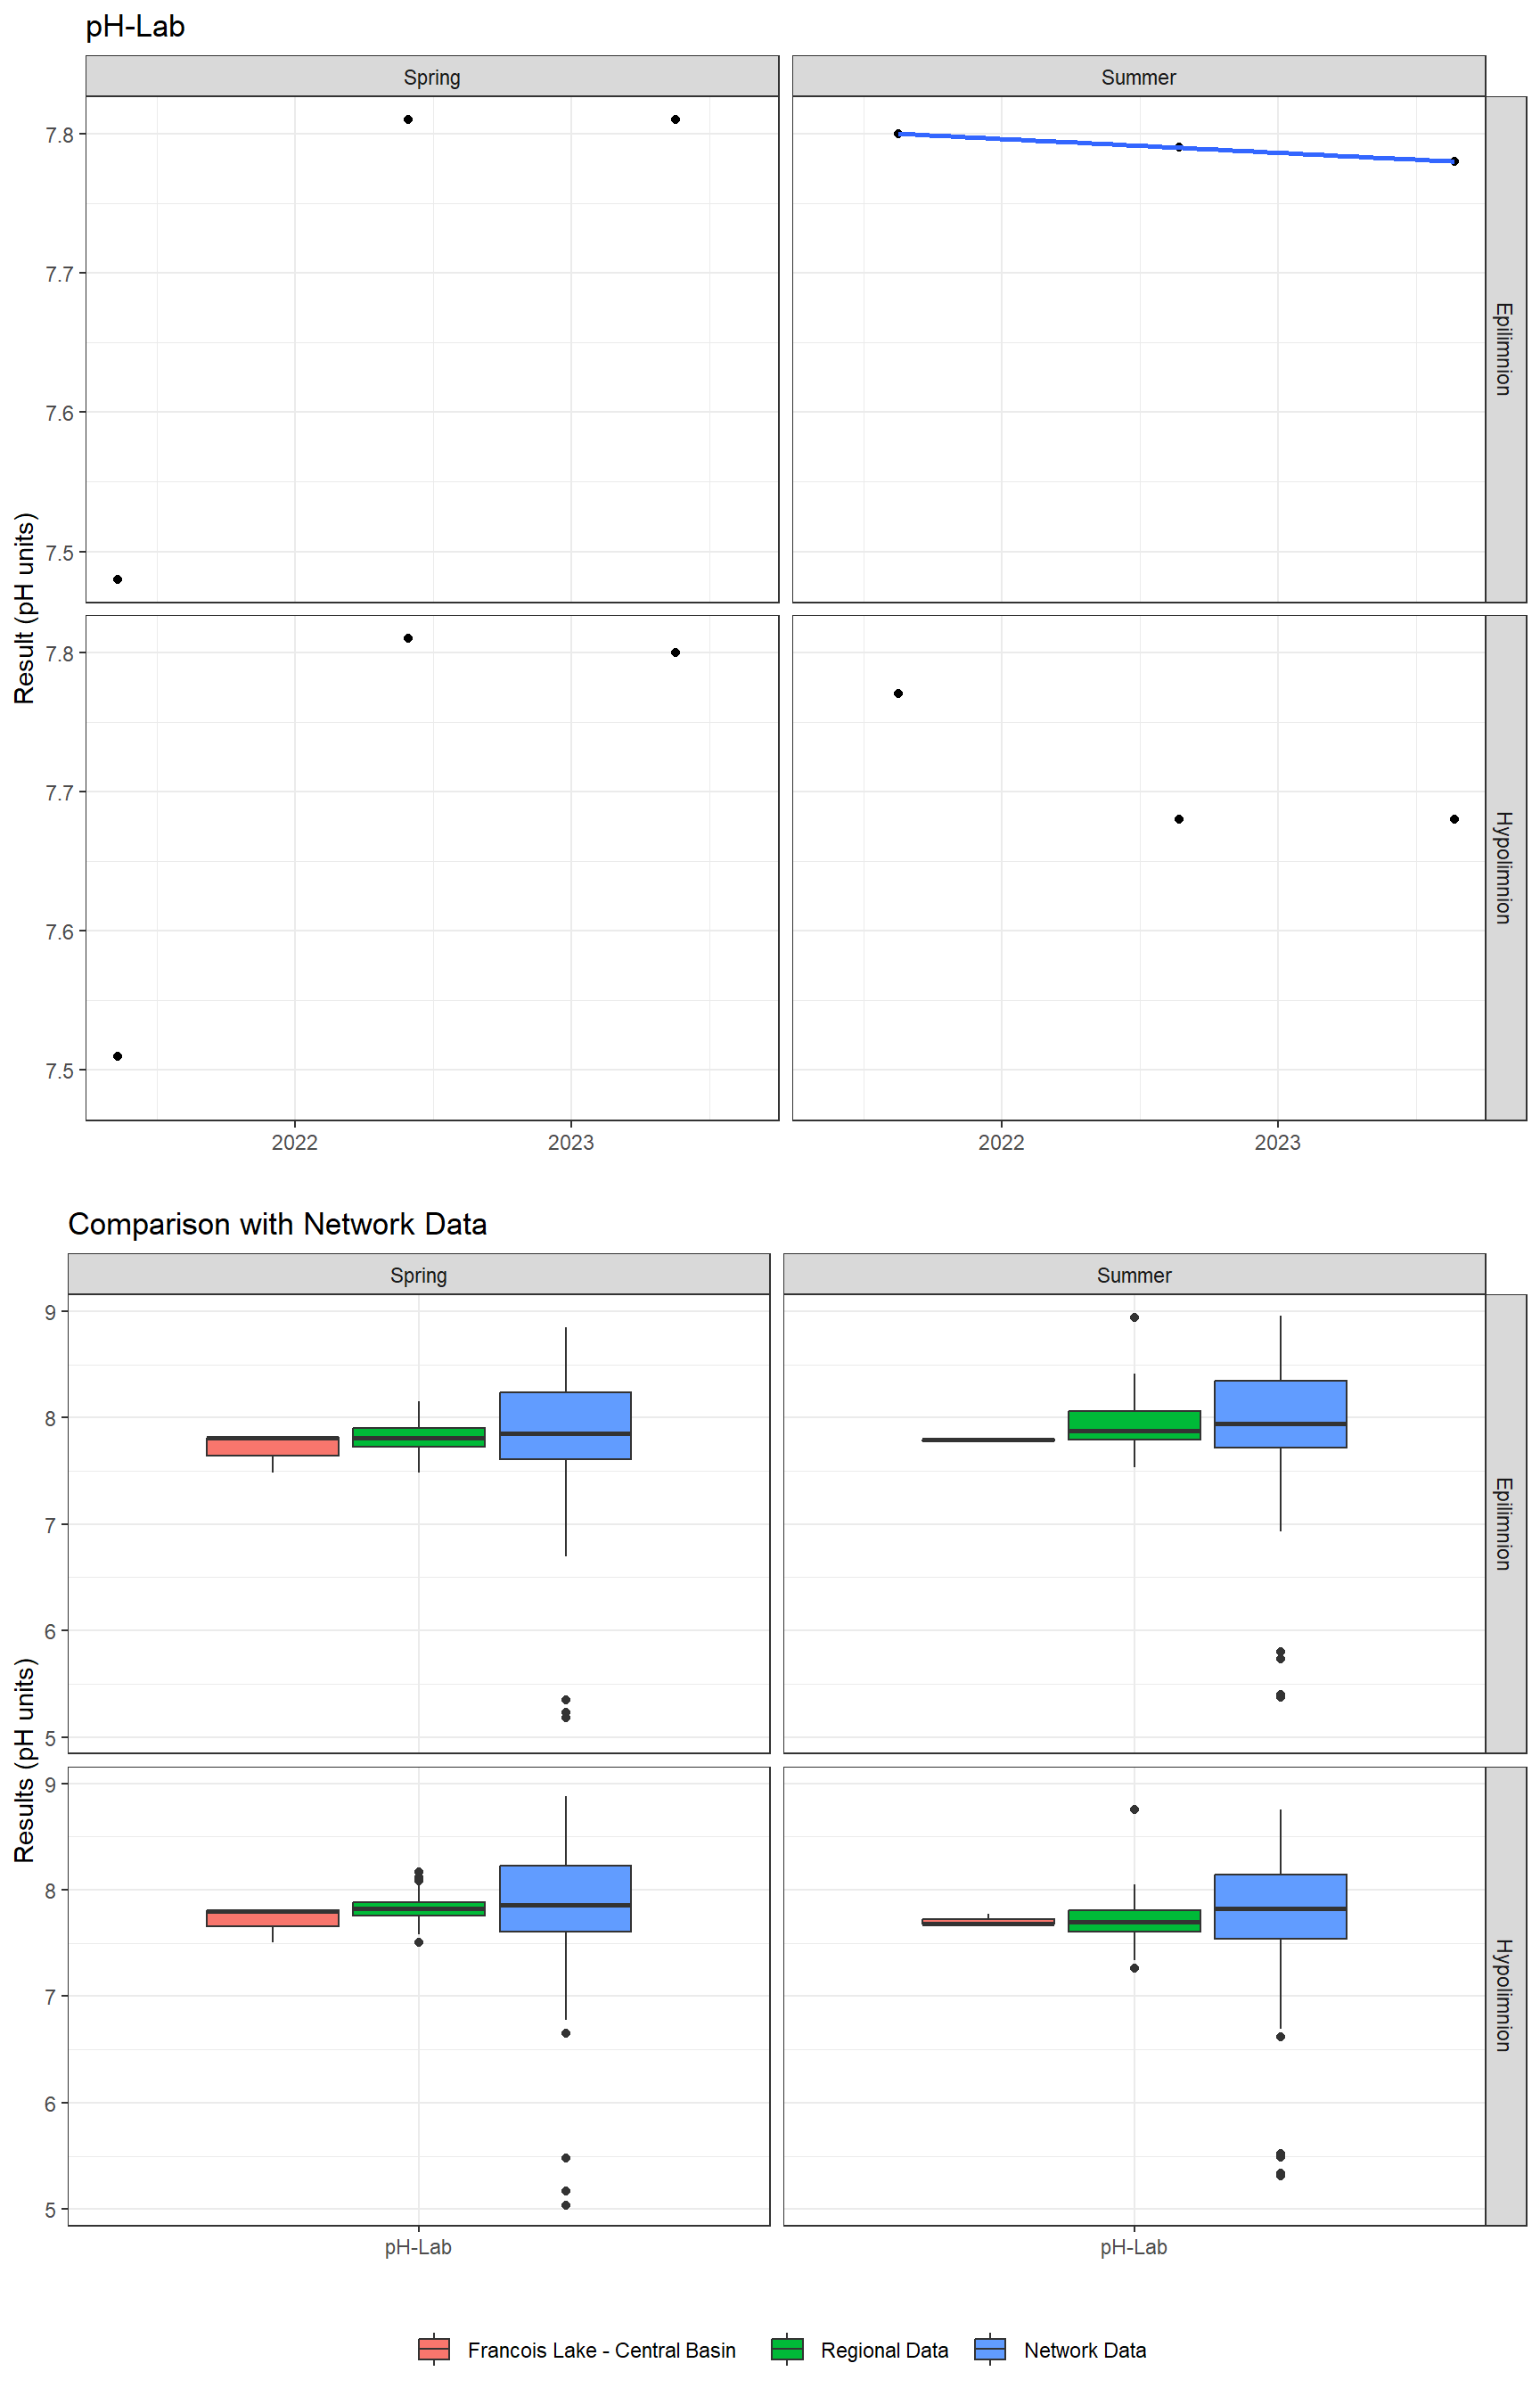 A plot showing results for pH-Lab